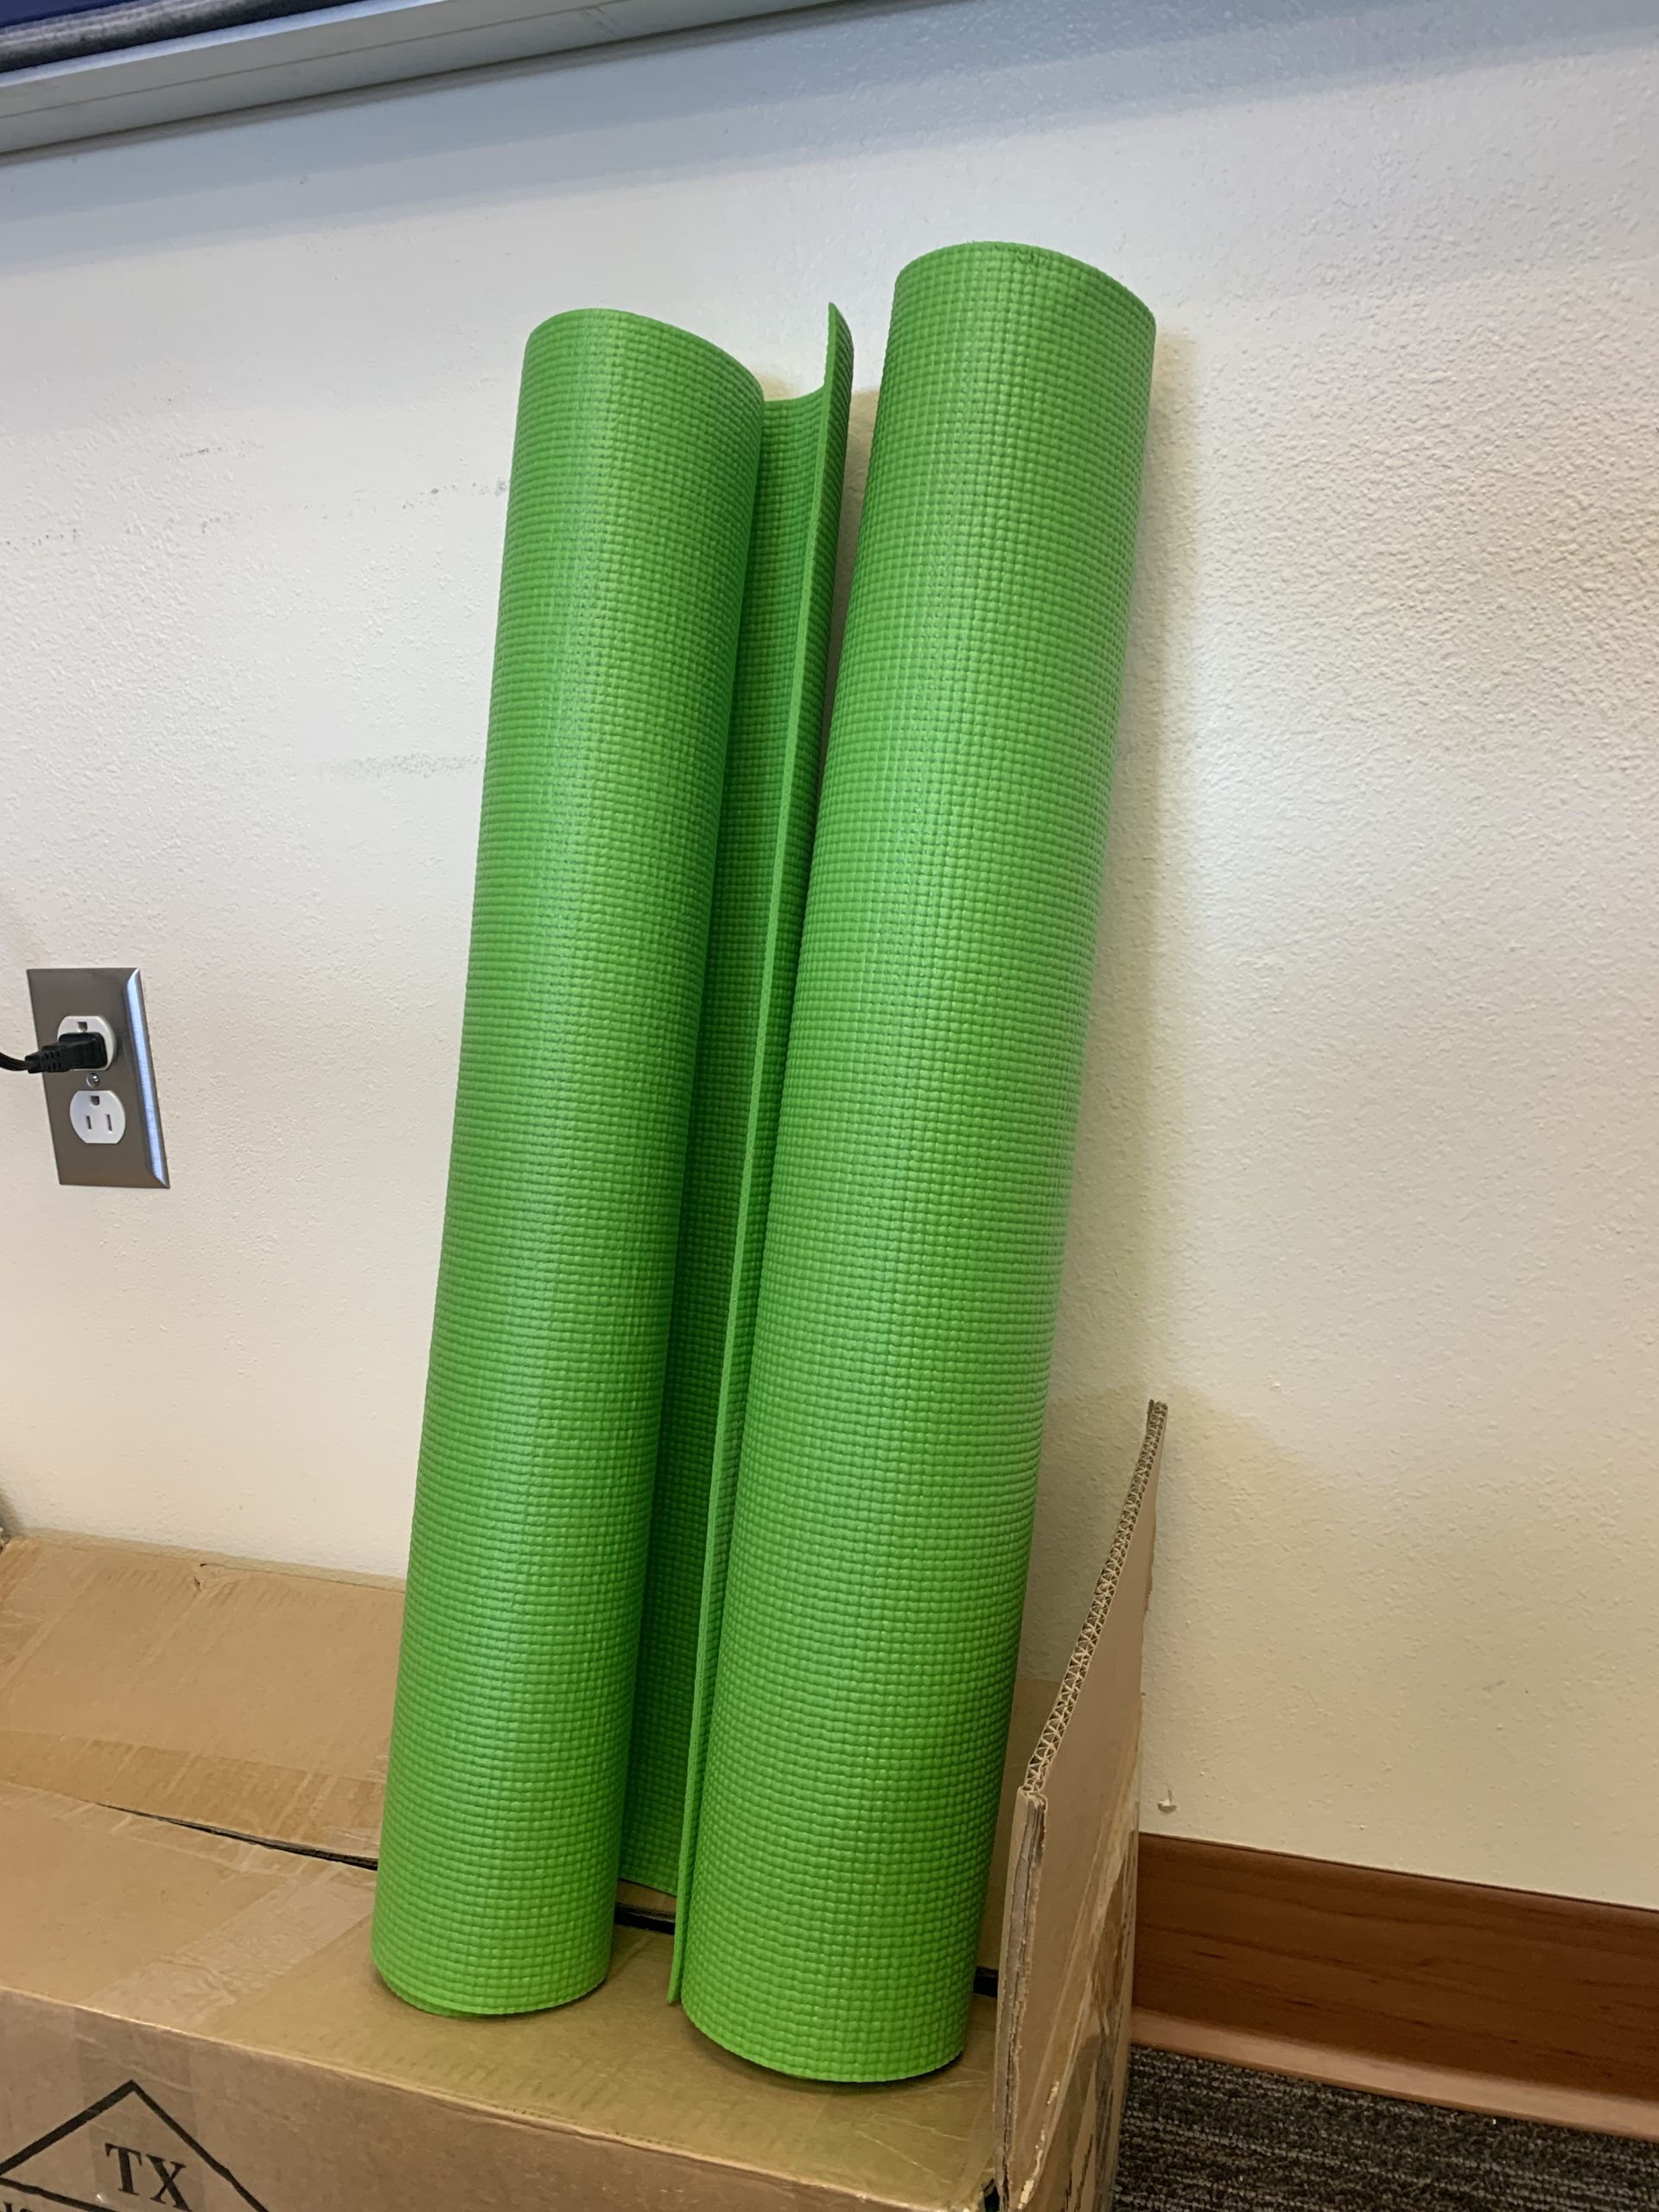 two rolled-up yoga mats